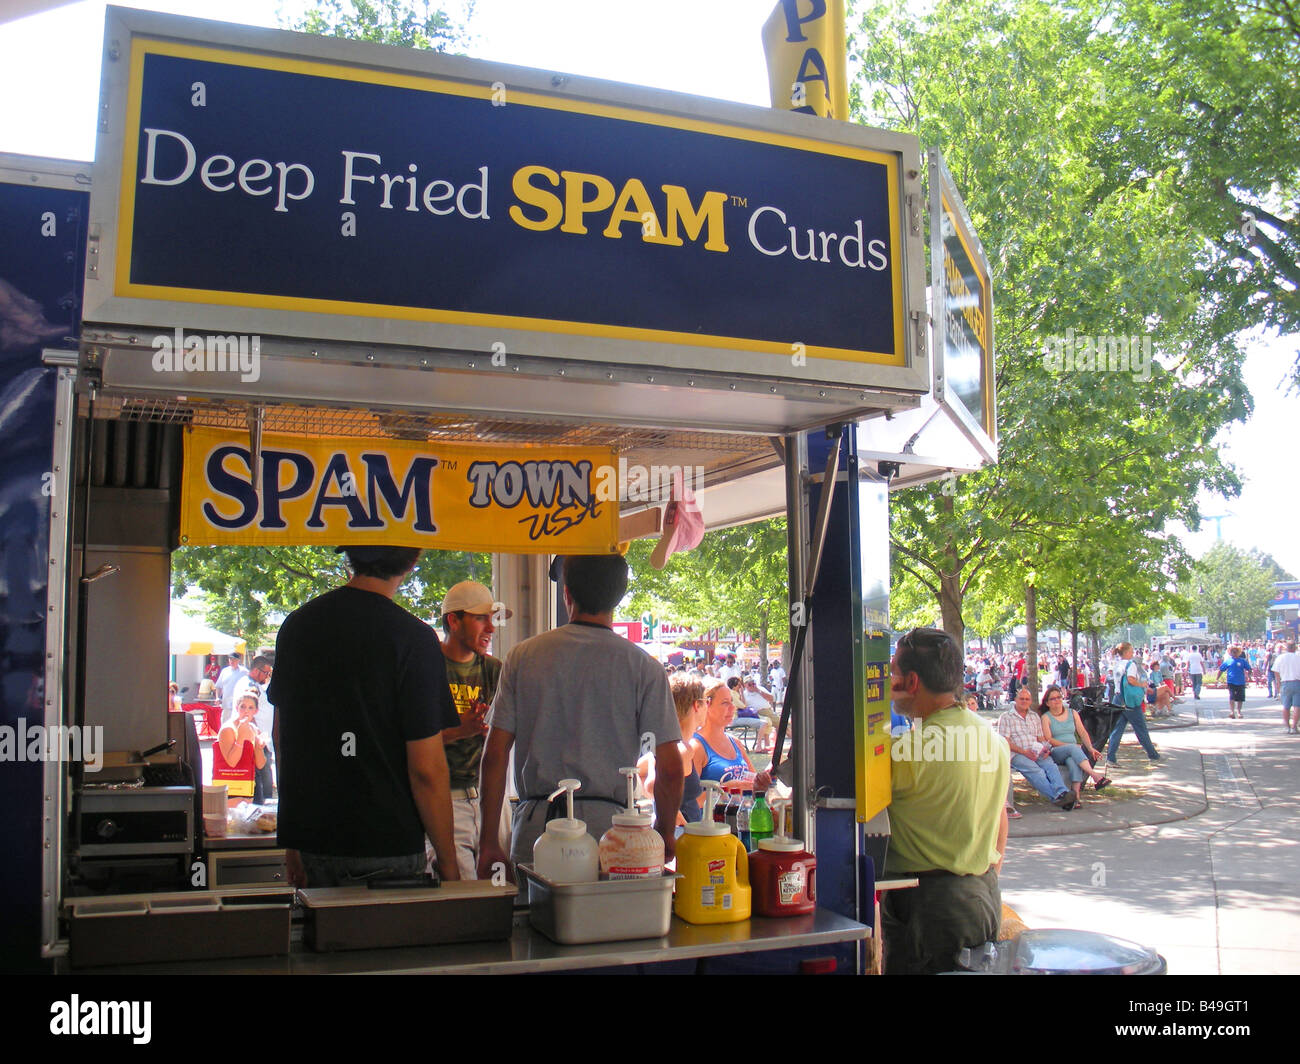 Deep fried Spam curds at the Minnesota State Fair Stock Photo